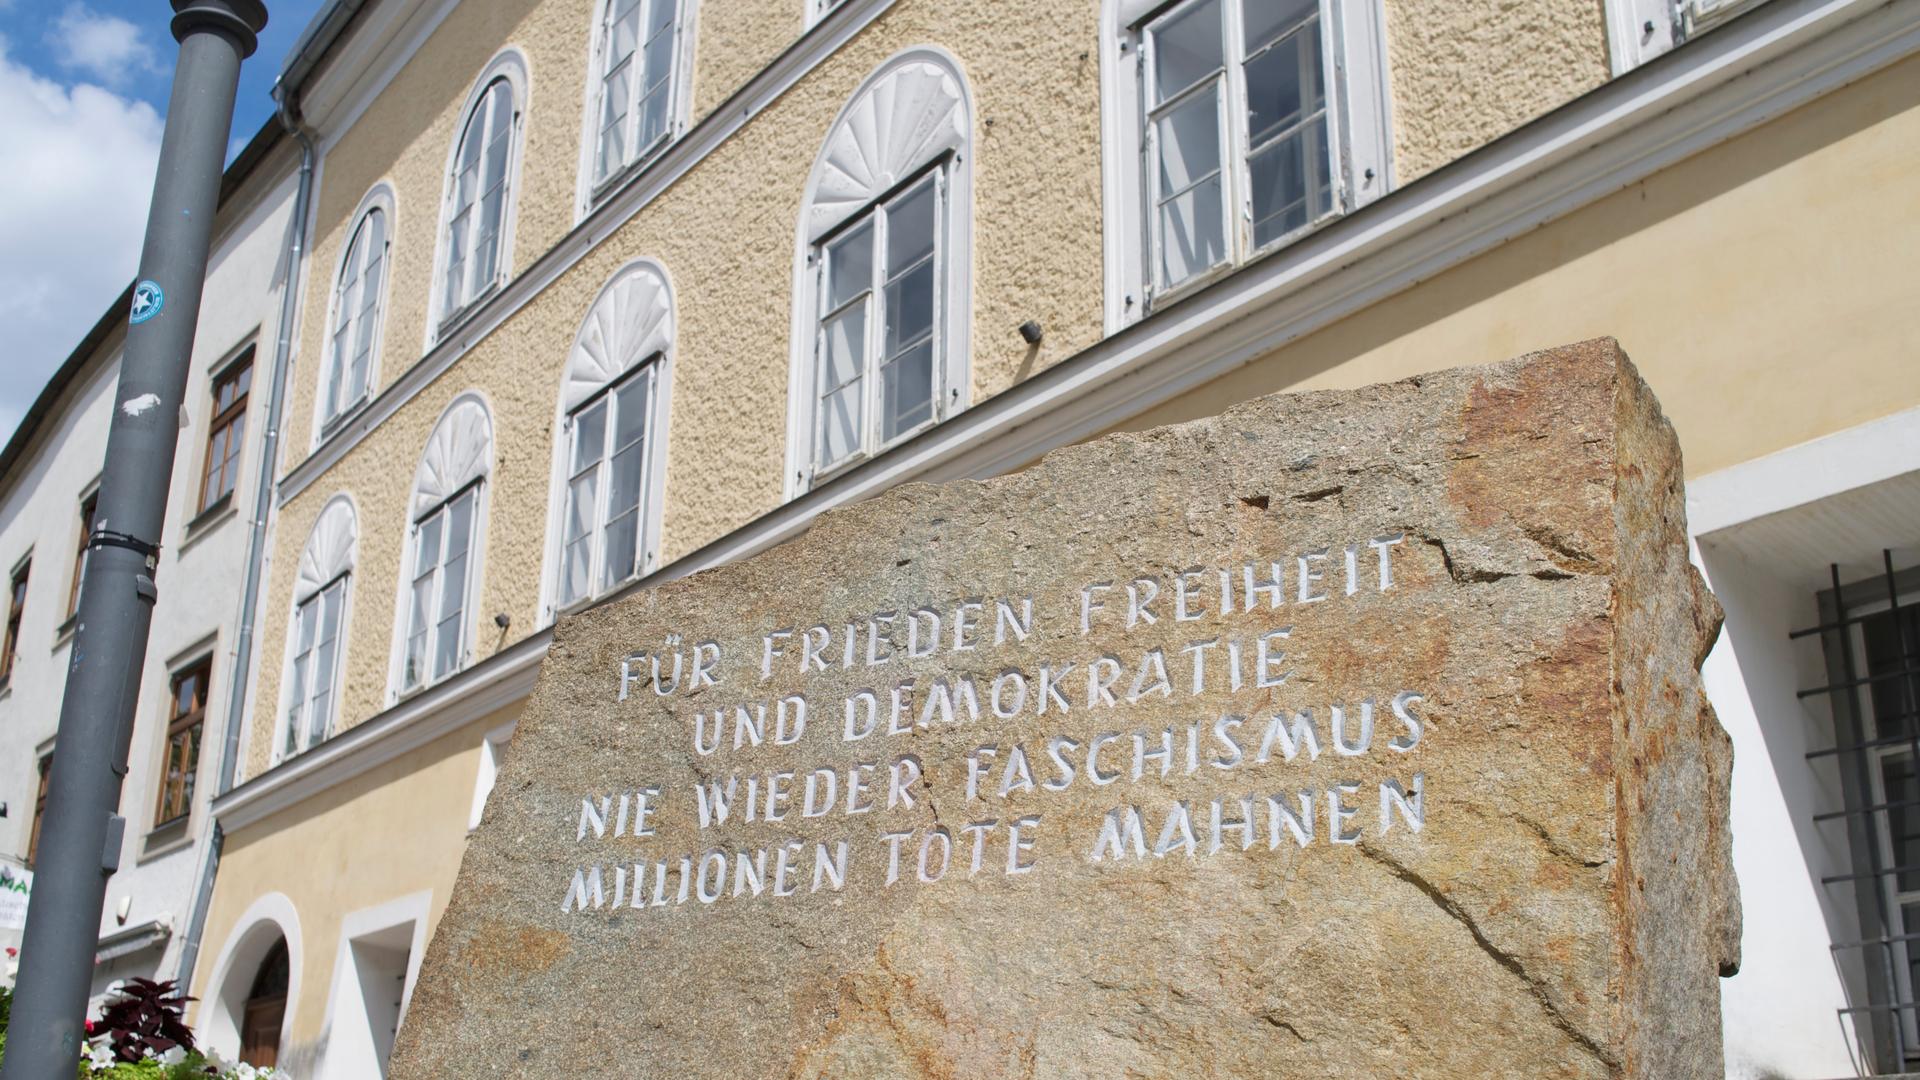 Outside the house in Austria where Adolf Hitler was born there's a block of stone from the Mauthausen concentration camp. It reads "for peace freedom and democracy, never again fascism, remember the millions of dead."